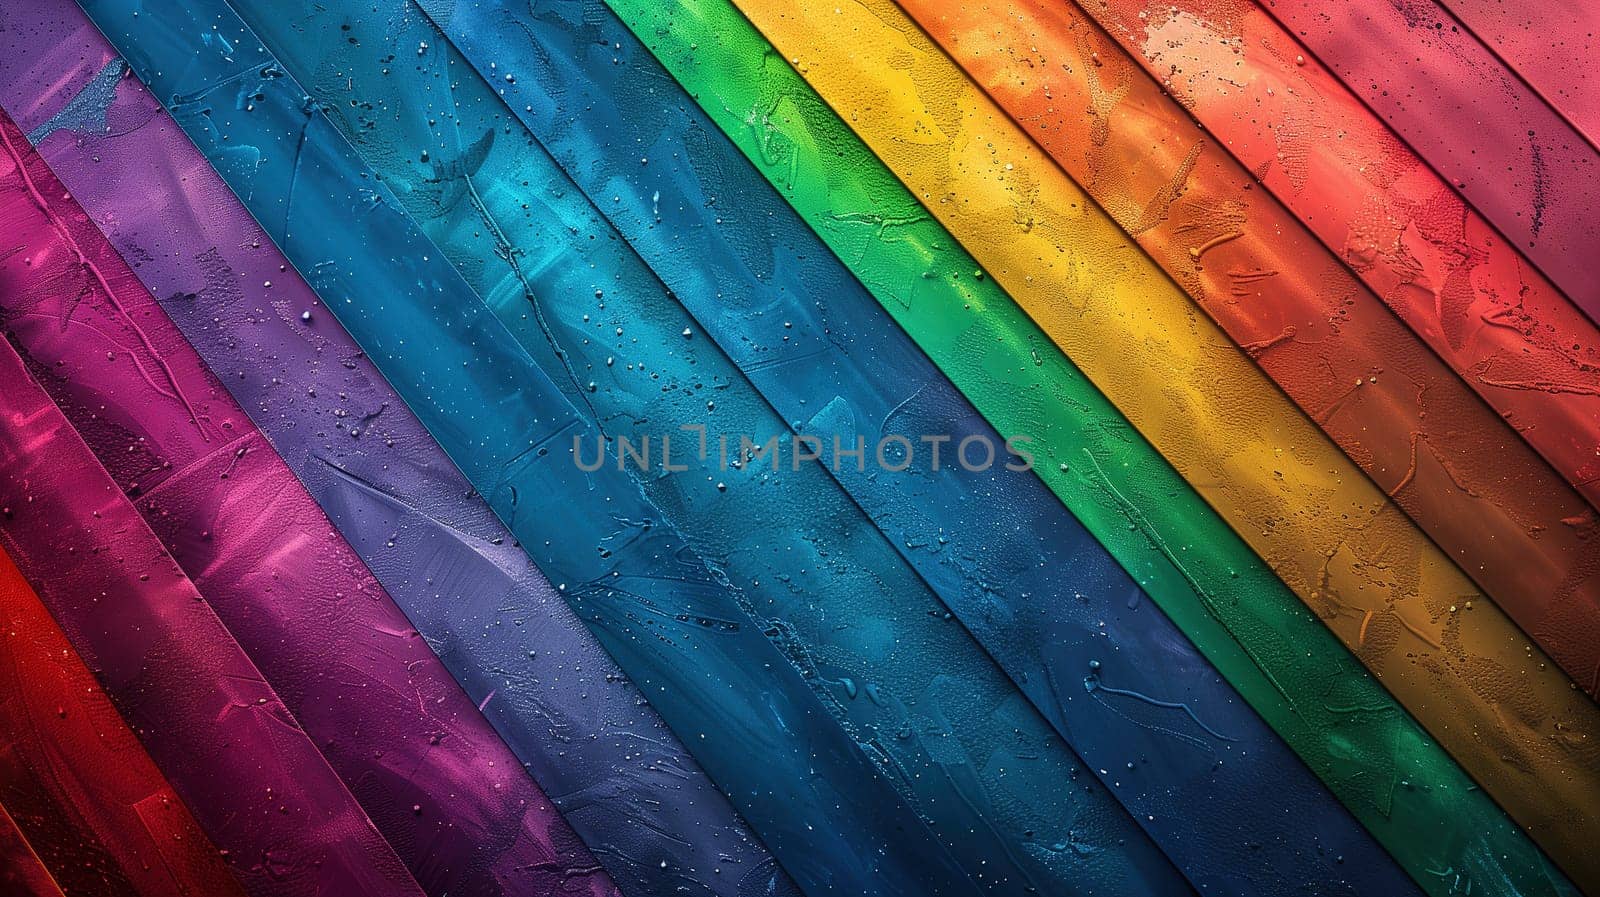 A wallpaper featuring a rainbow of colors in a myriad of hues, from bright reds to deep purples and everything in between. The colors are arranged in a seamless pattern, creating a visually striking display that embodies the lgbt pride concept.